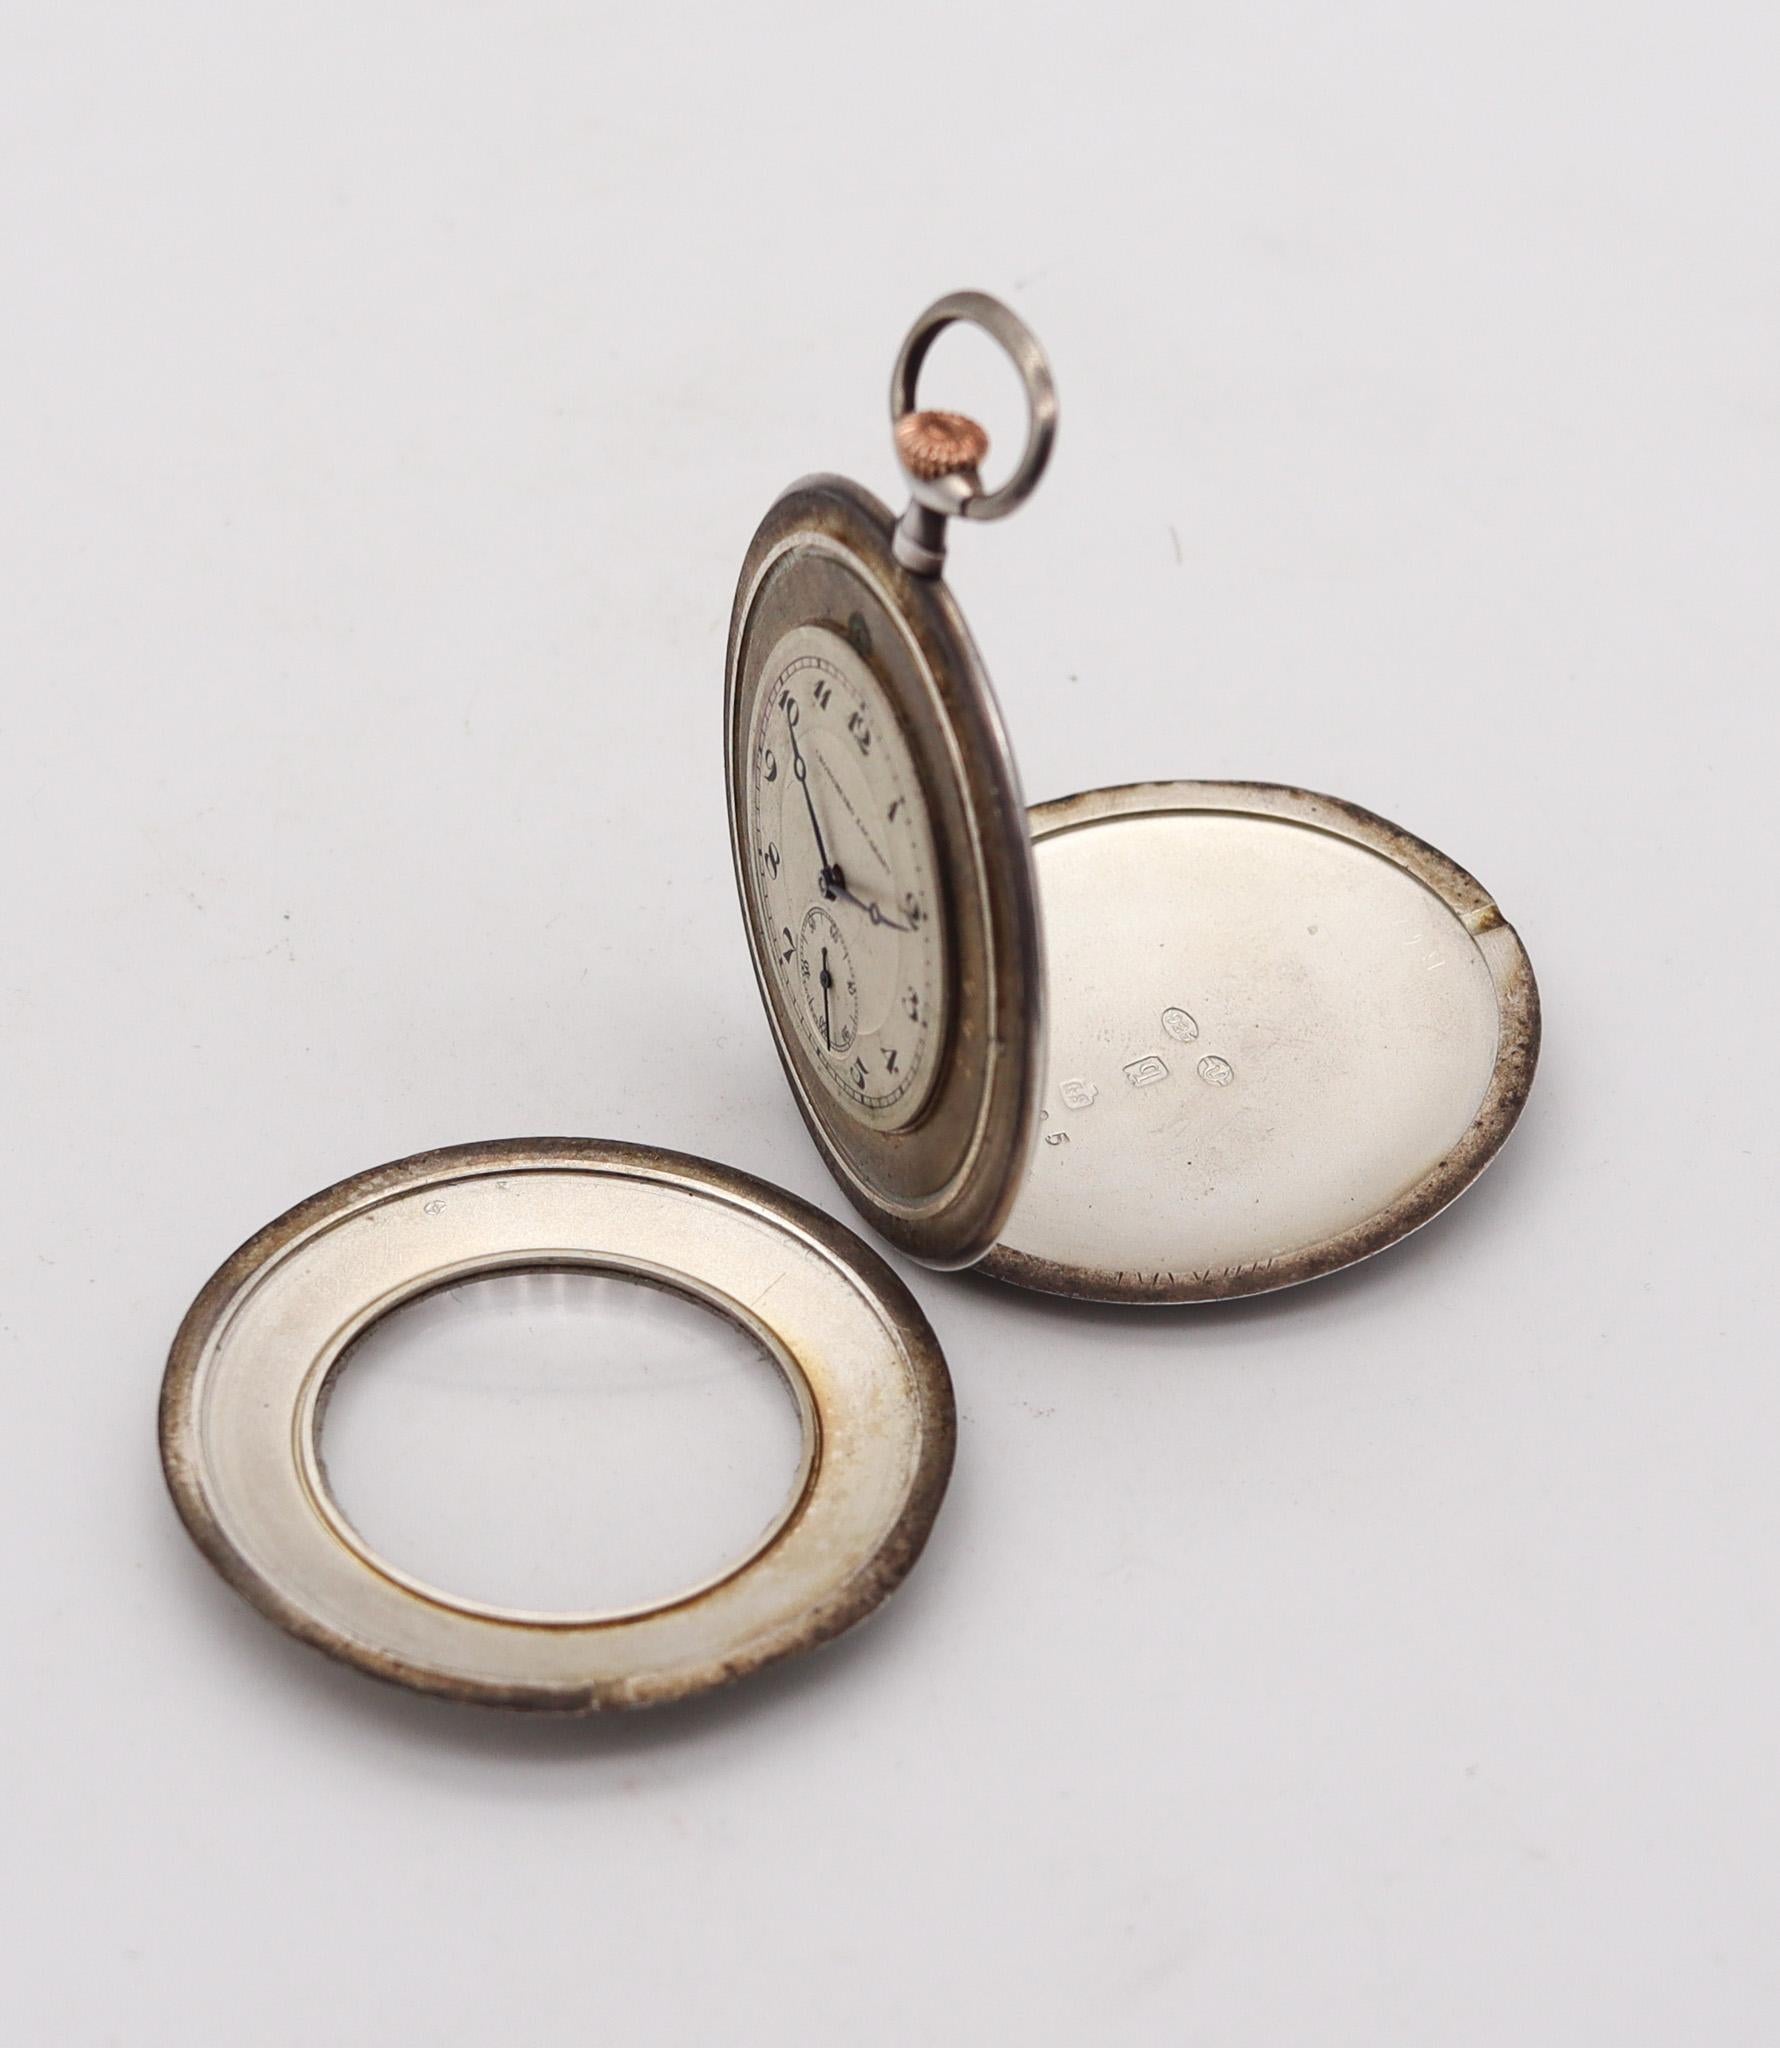 George Stockwell 1911 London Edwardian Enameled Guilloche Sterling Pocket Watch  For Sale 4